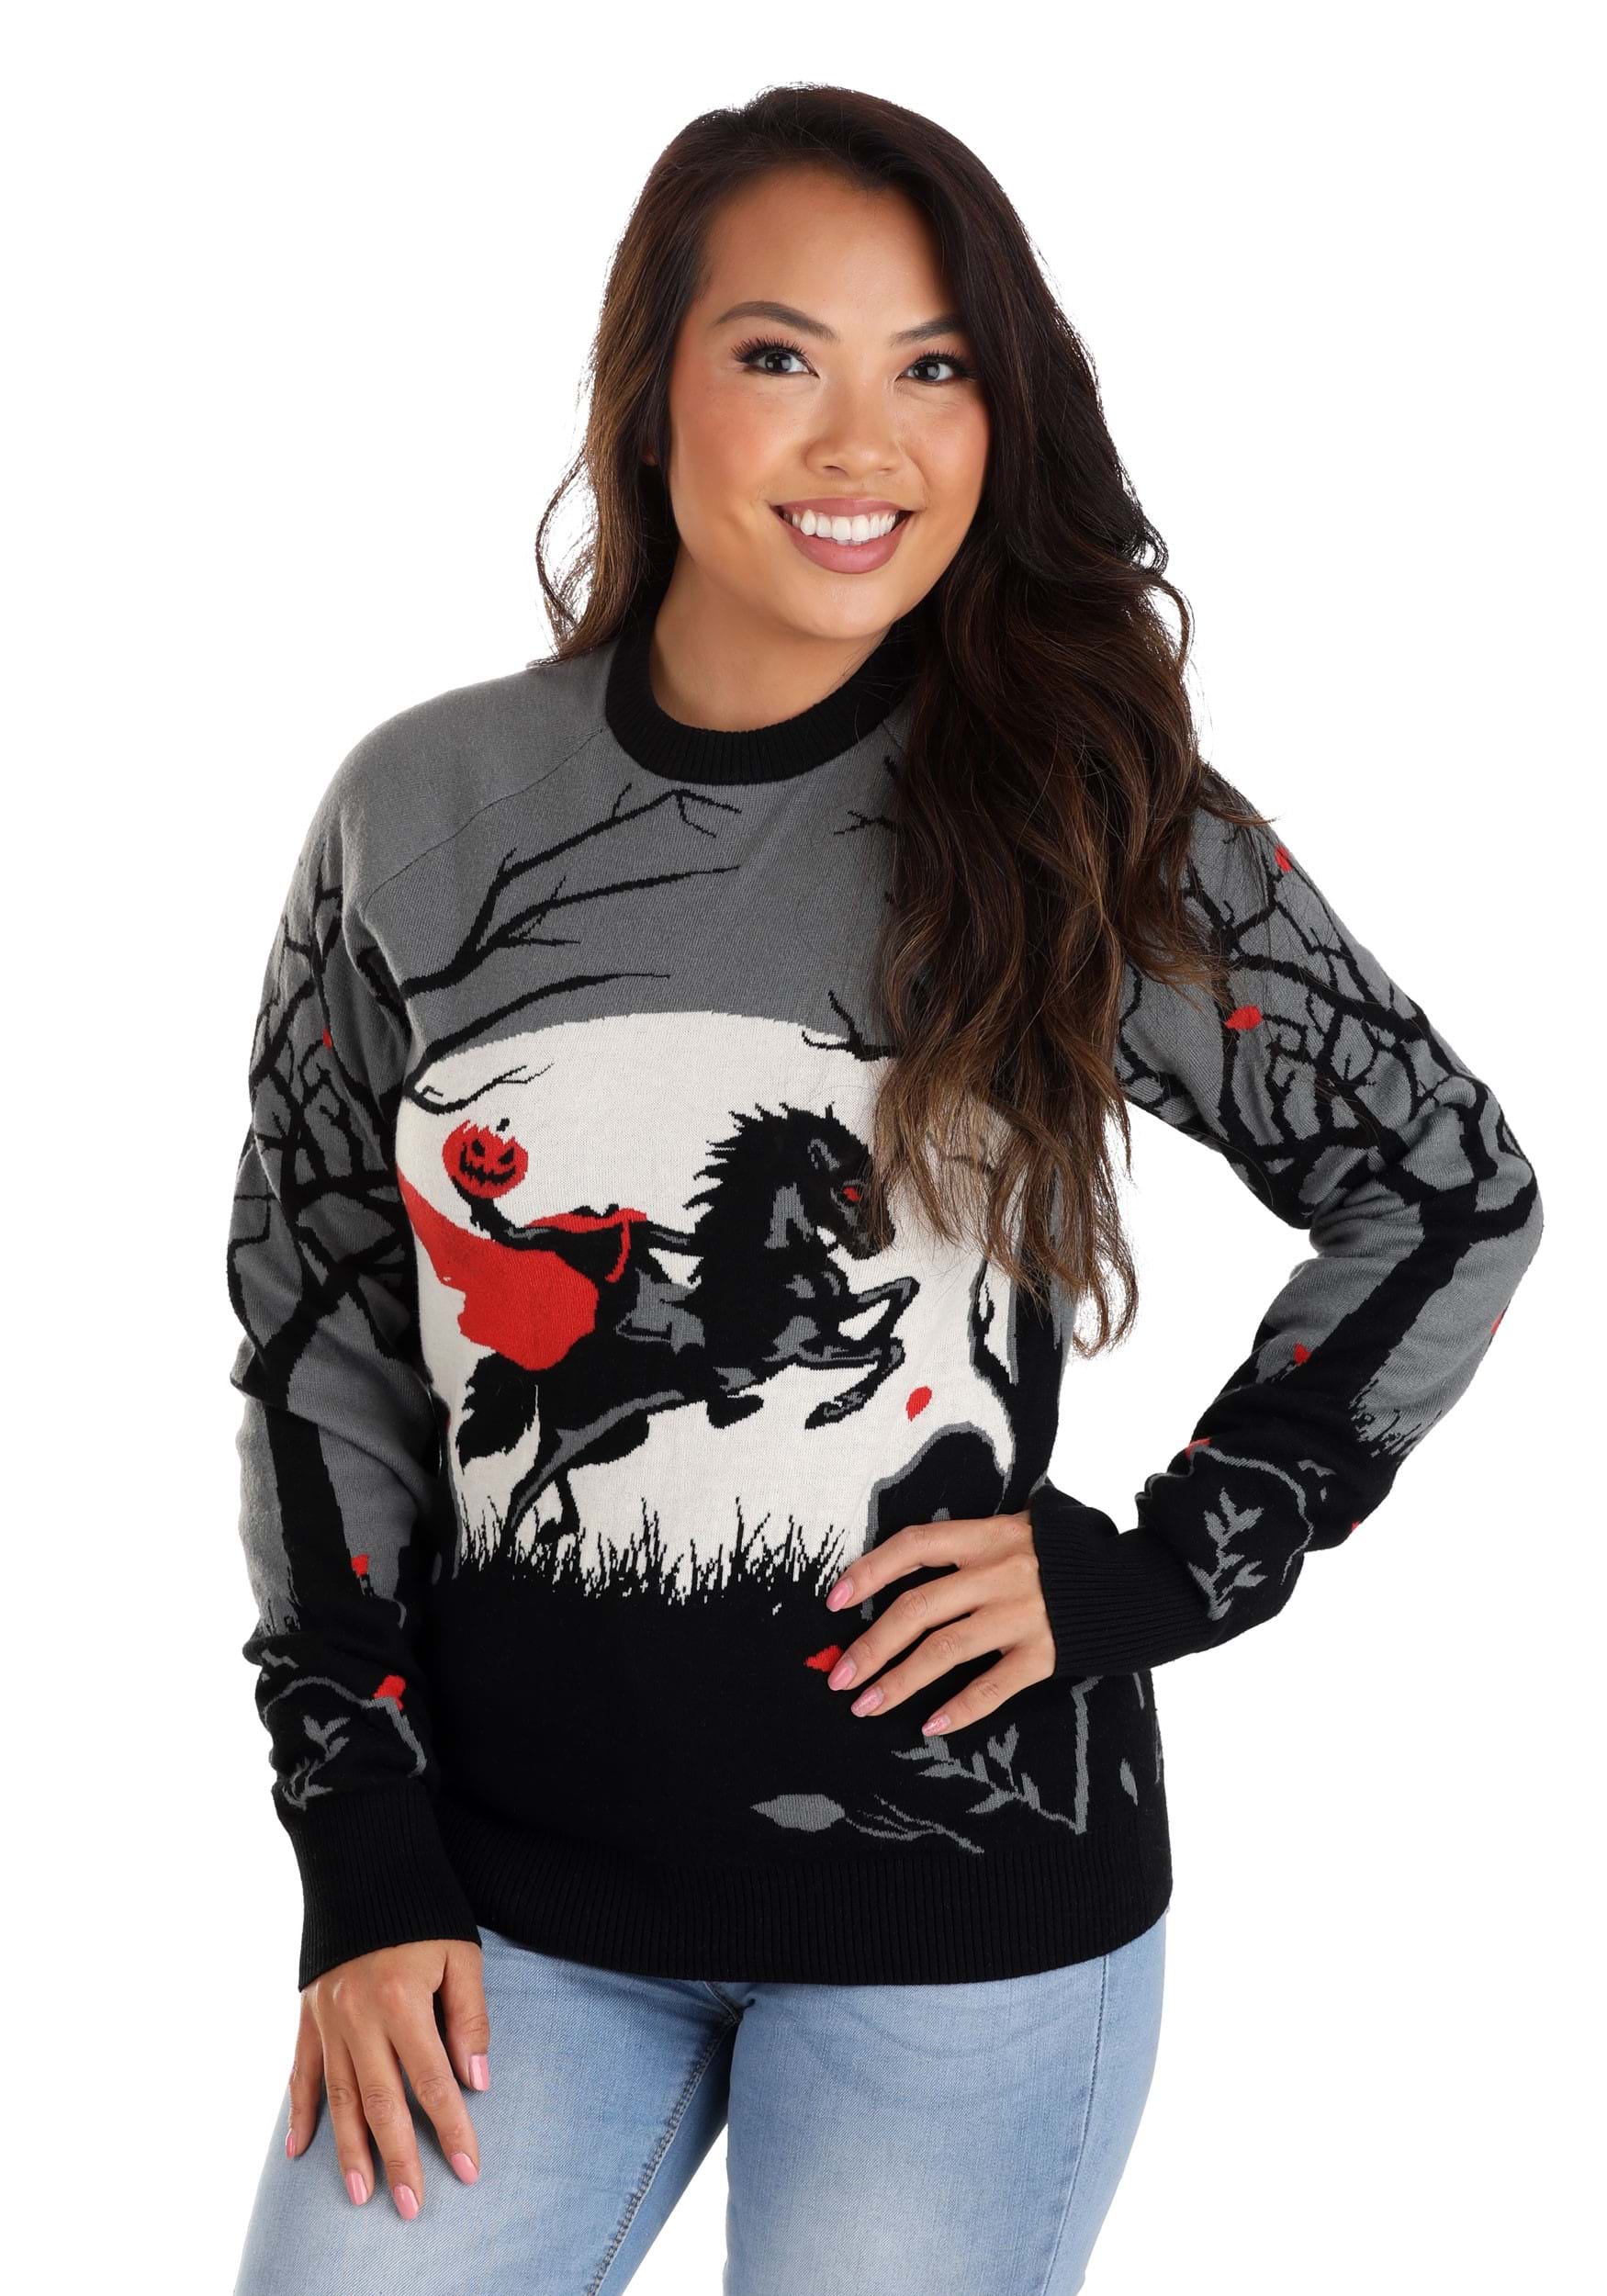 Headless Horseman Ugly Halloween Sweater for Adults